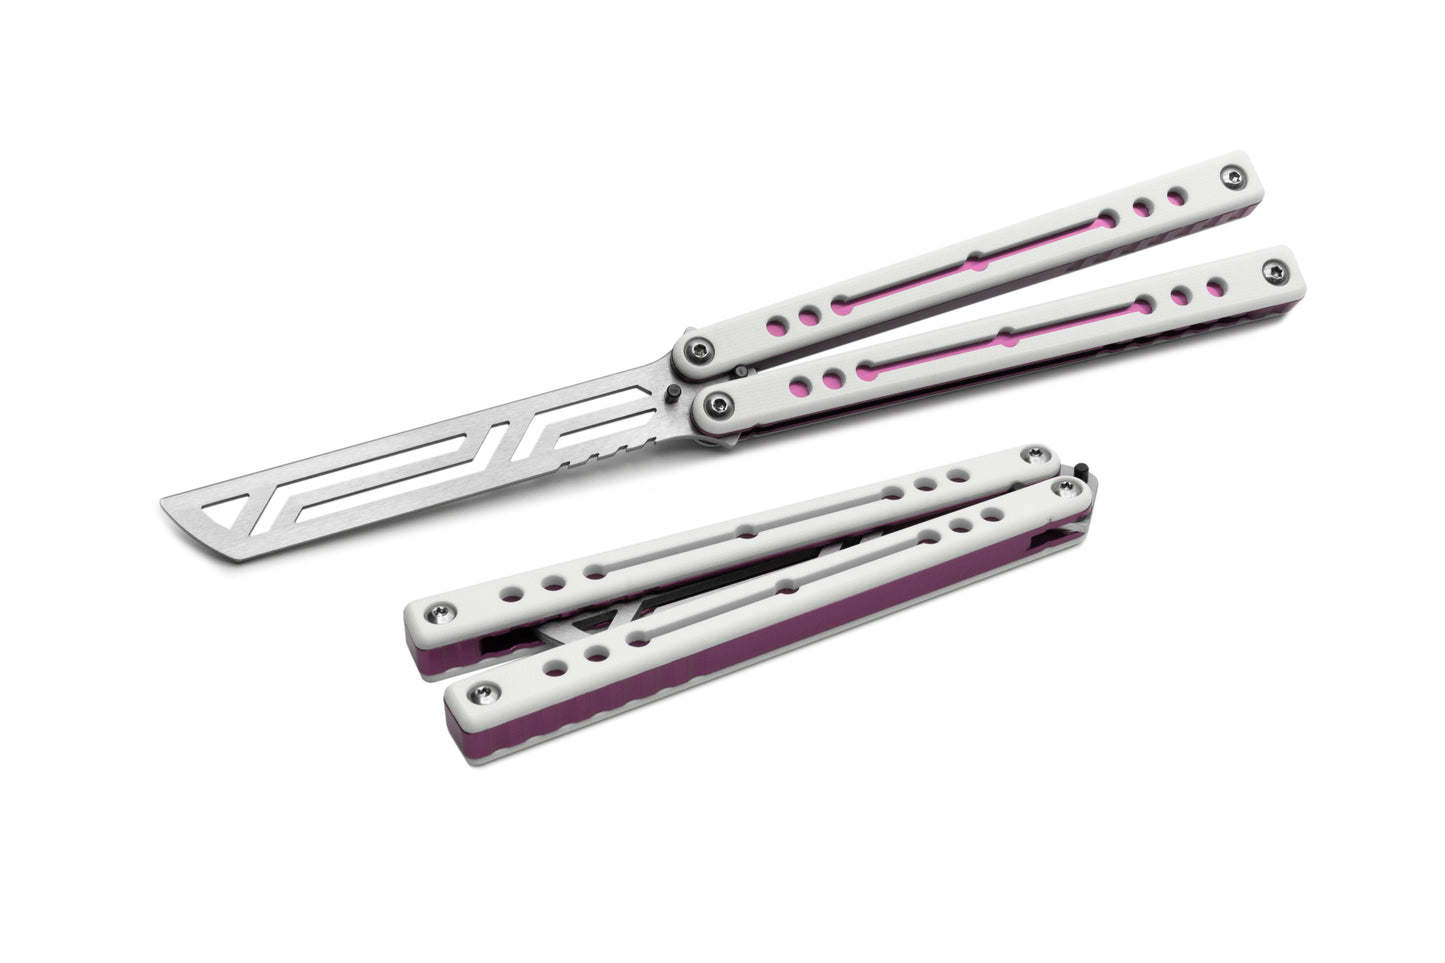 Winter Pink NautilusV2 balisong with g10 scales